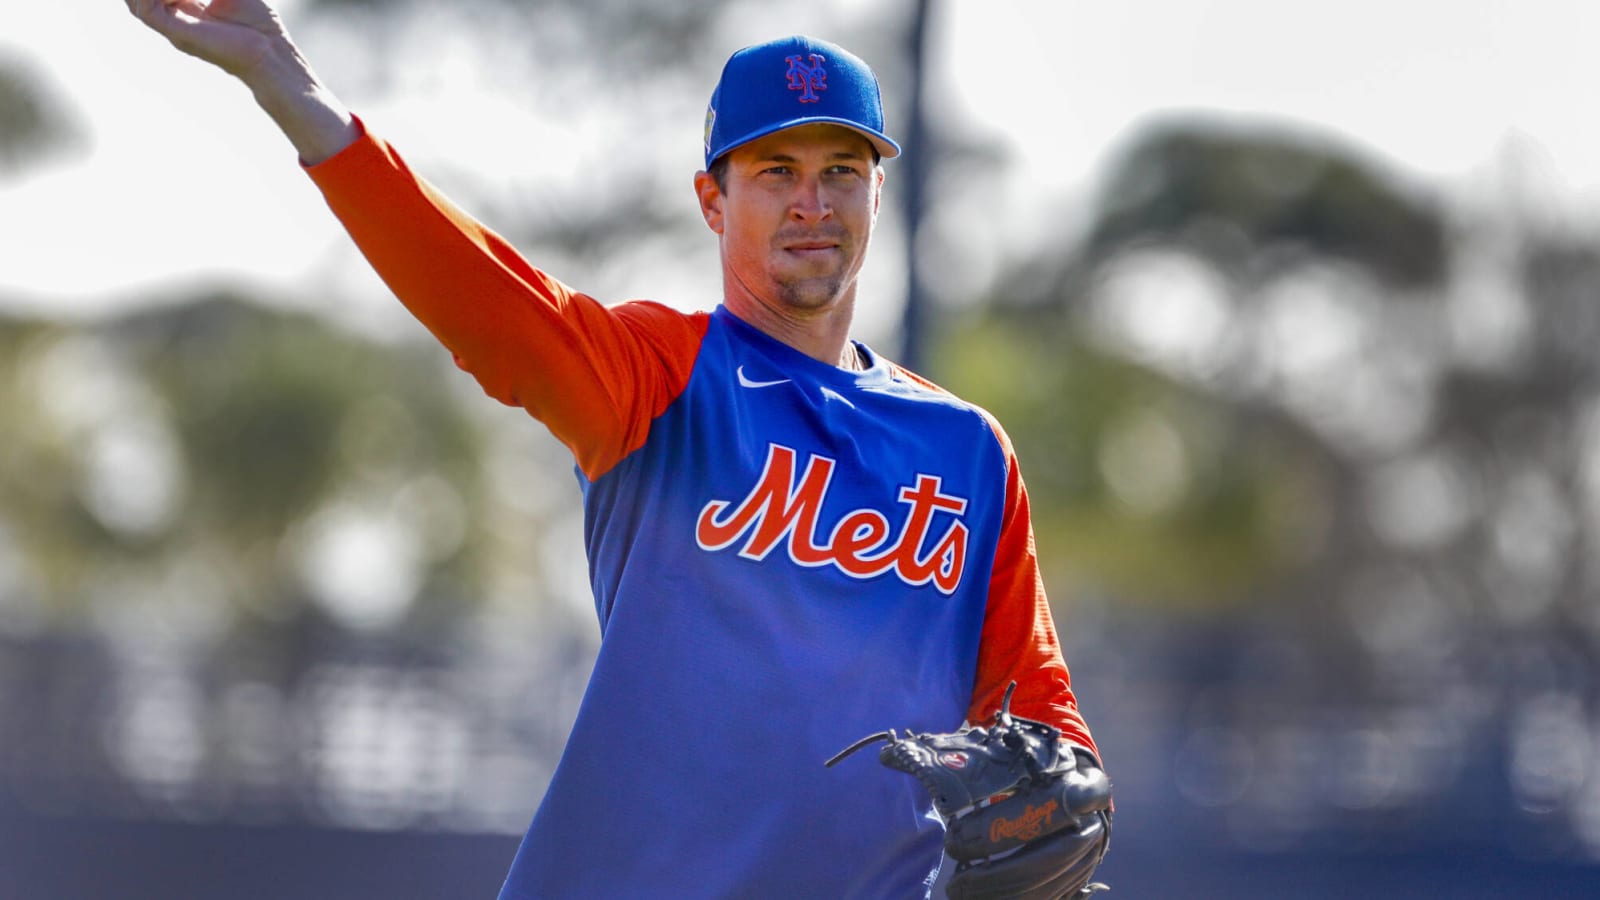 Report: deGrom, Mets may need to address 'micro-aggressions'